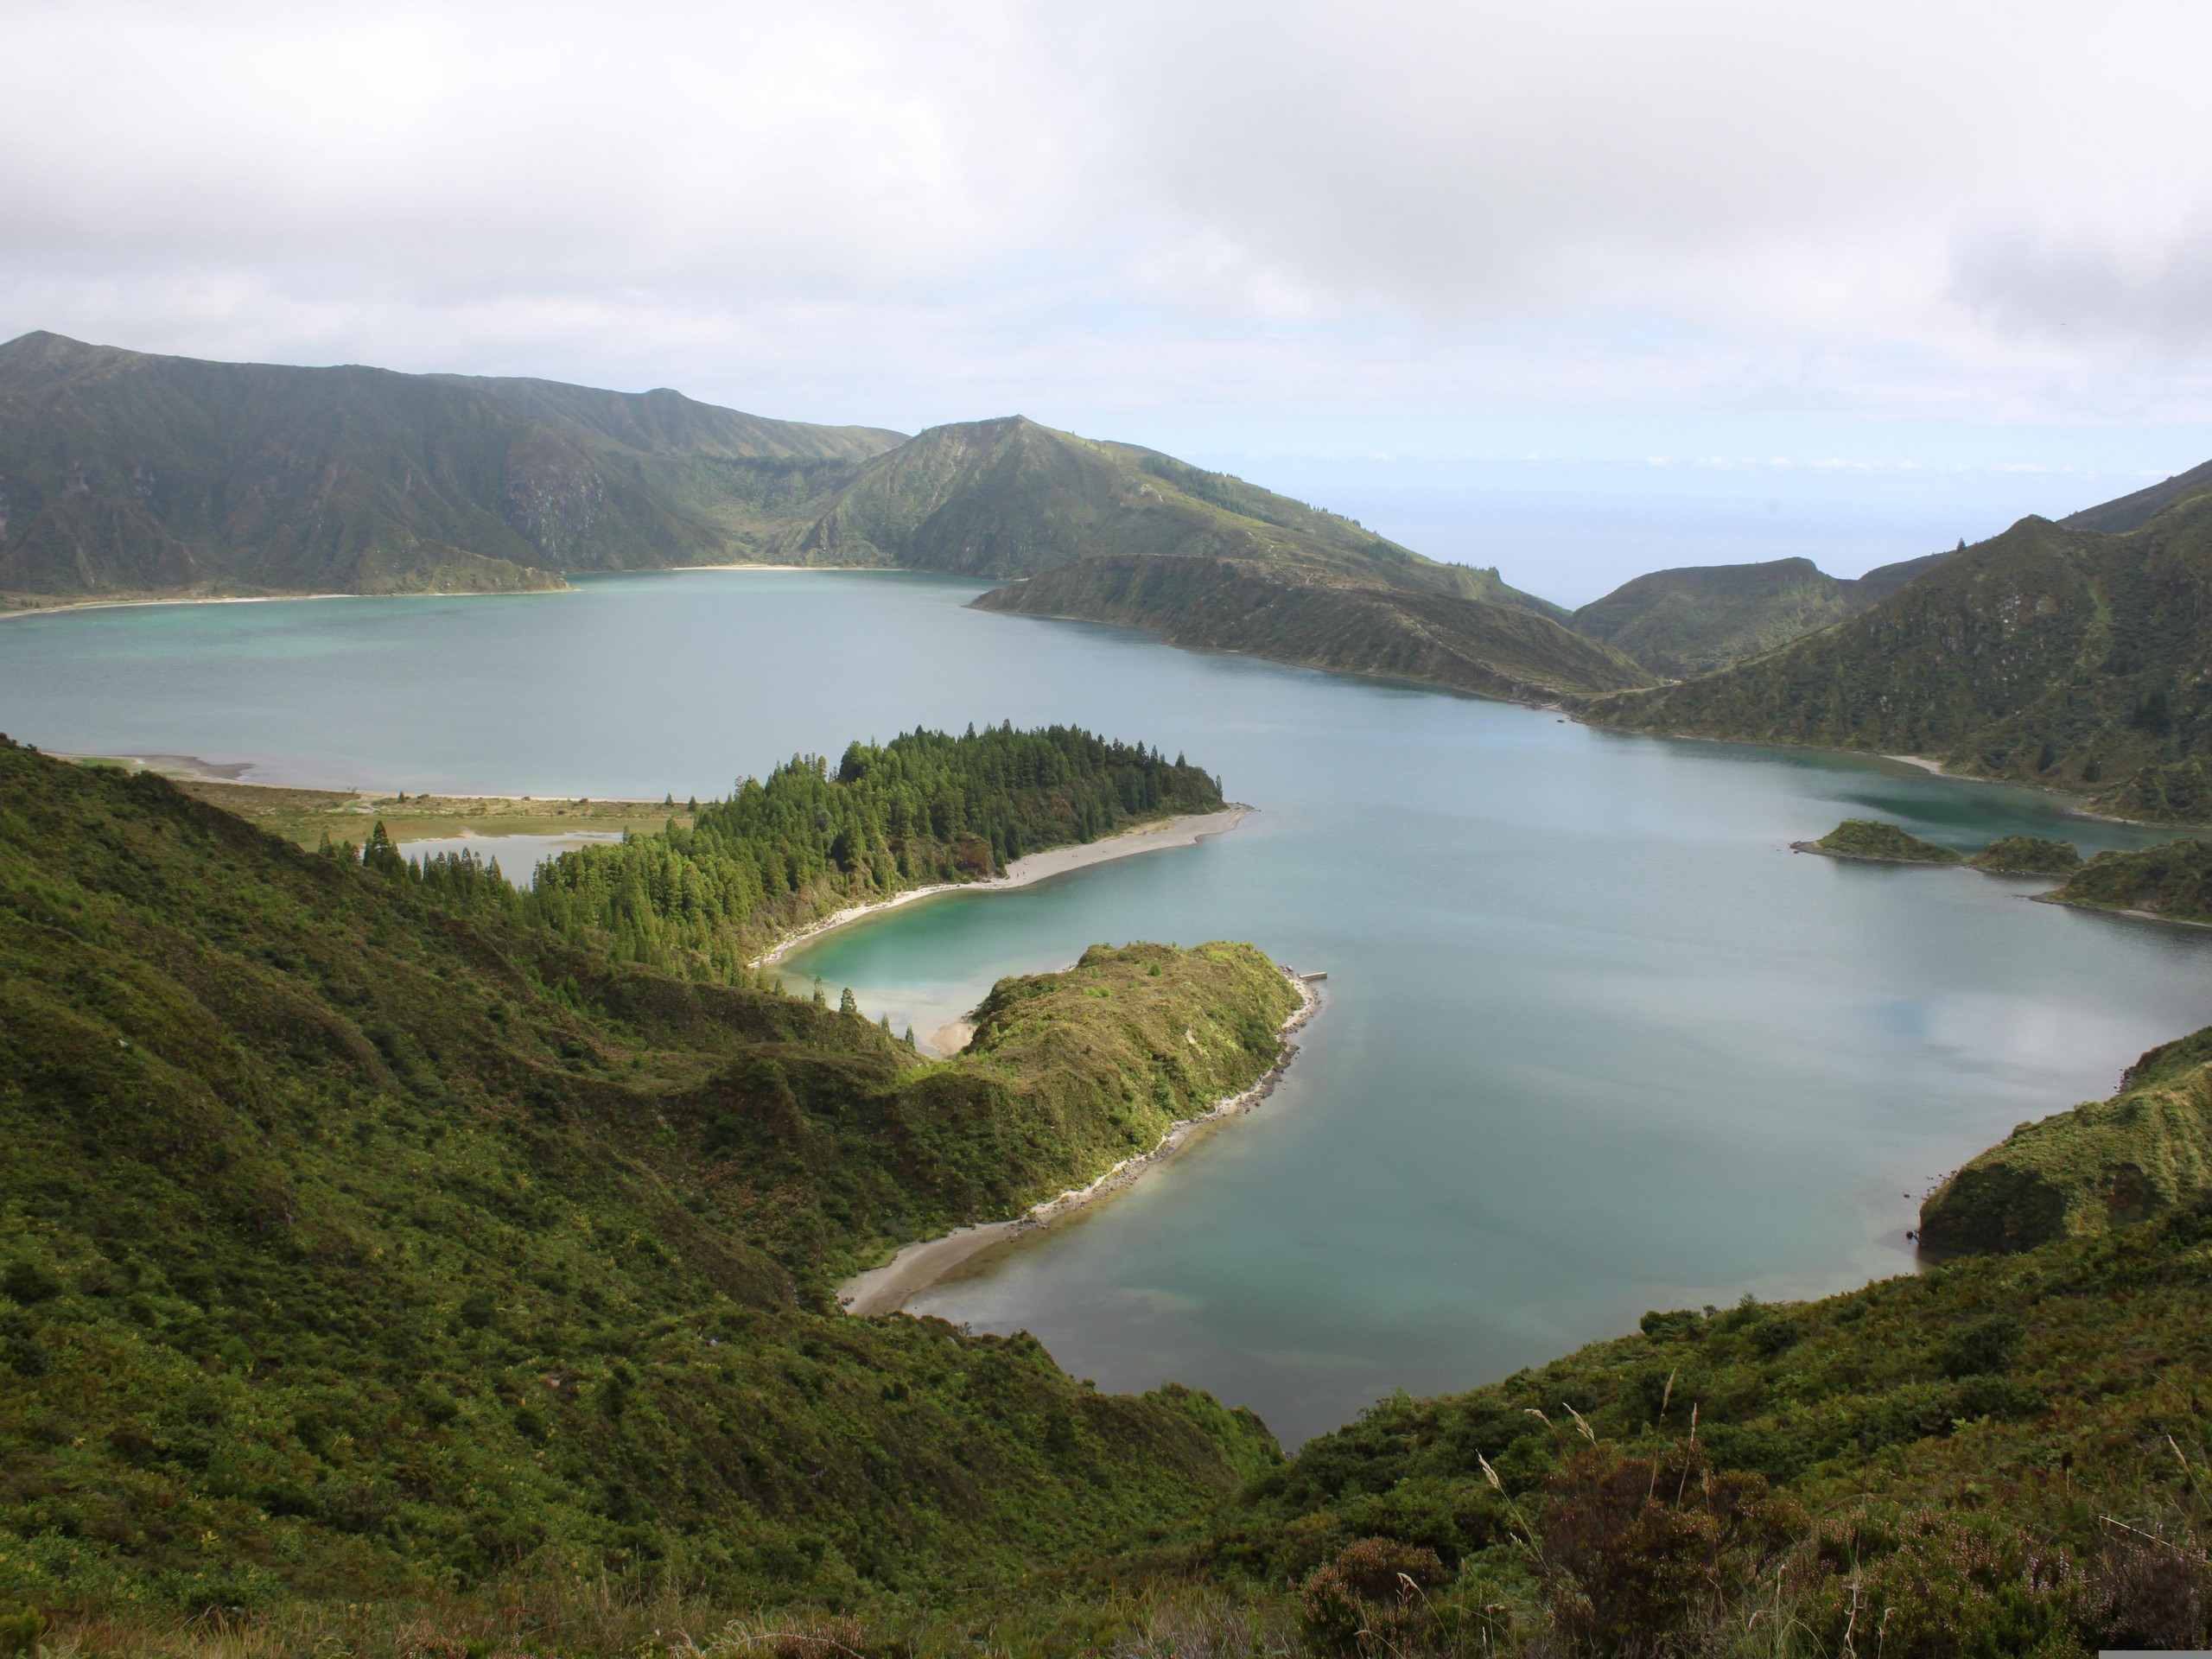 Sao Miguel island, Lake of Fire, Azores